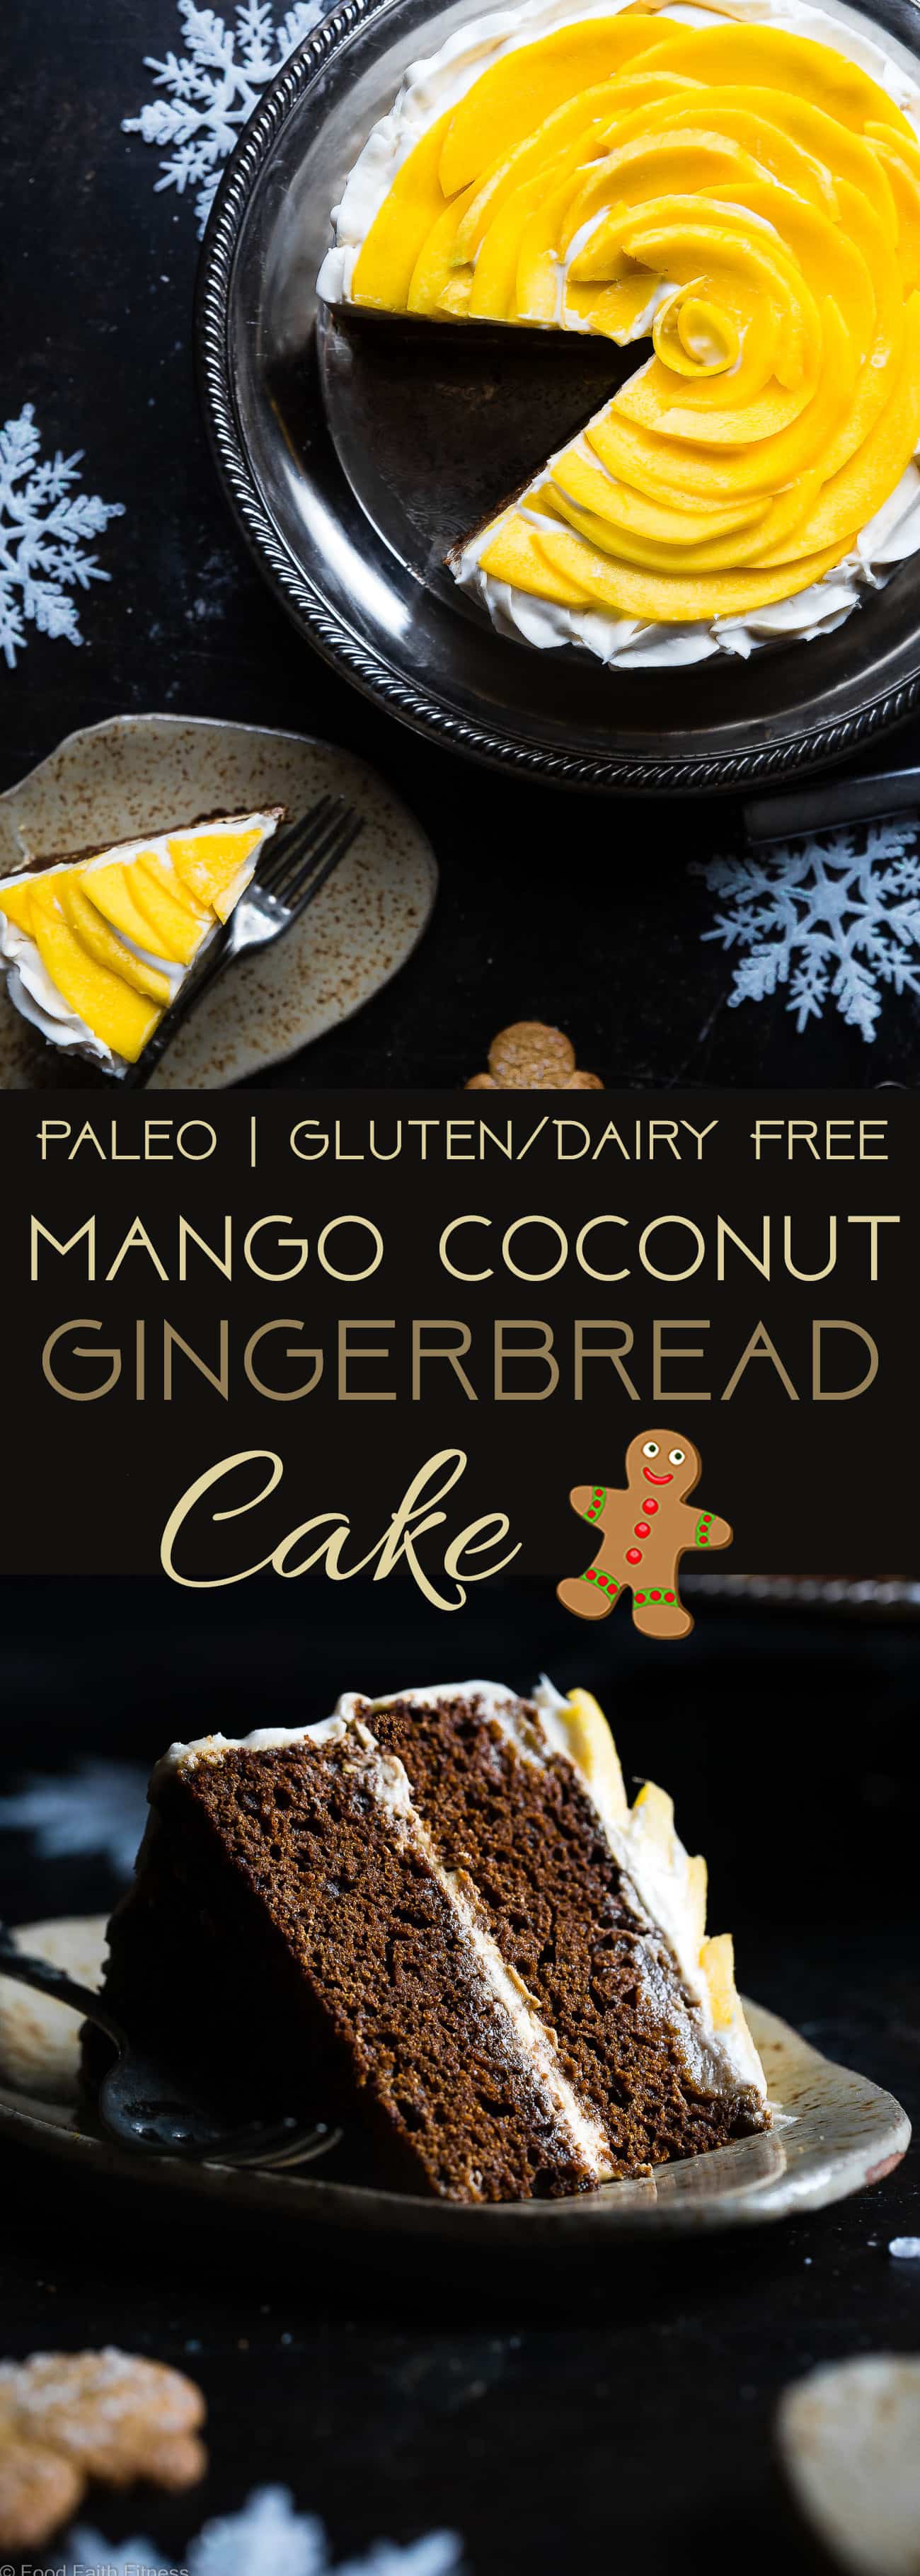 Gluten Free Mango Gingerbread Cake with Coconut Cream - This spicy-sweet, show stopping gluten free gingerbread cake is studded with juicy, fresh mangoes to create a healthy, paleo-friendly, festive dessert for the Holidays! | Foodfaithfitness.com | @FoodFaithFit | mango cake. healthy gingerbread. gluten free christmas desserts. healthy Christmas desserts. mango recipes. gluten free cake. Paleo cake.